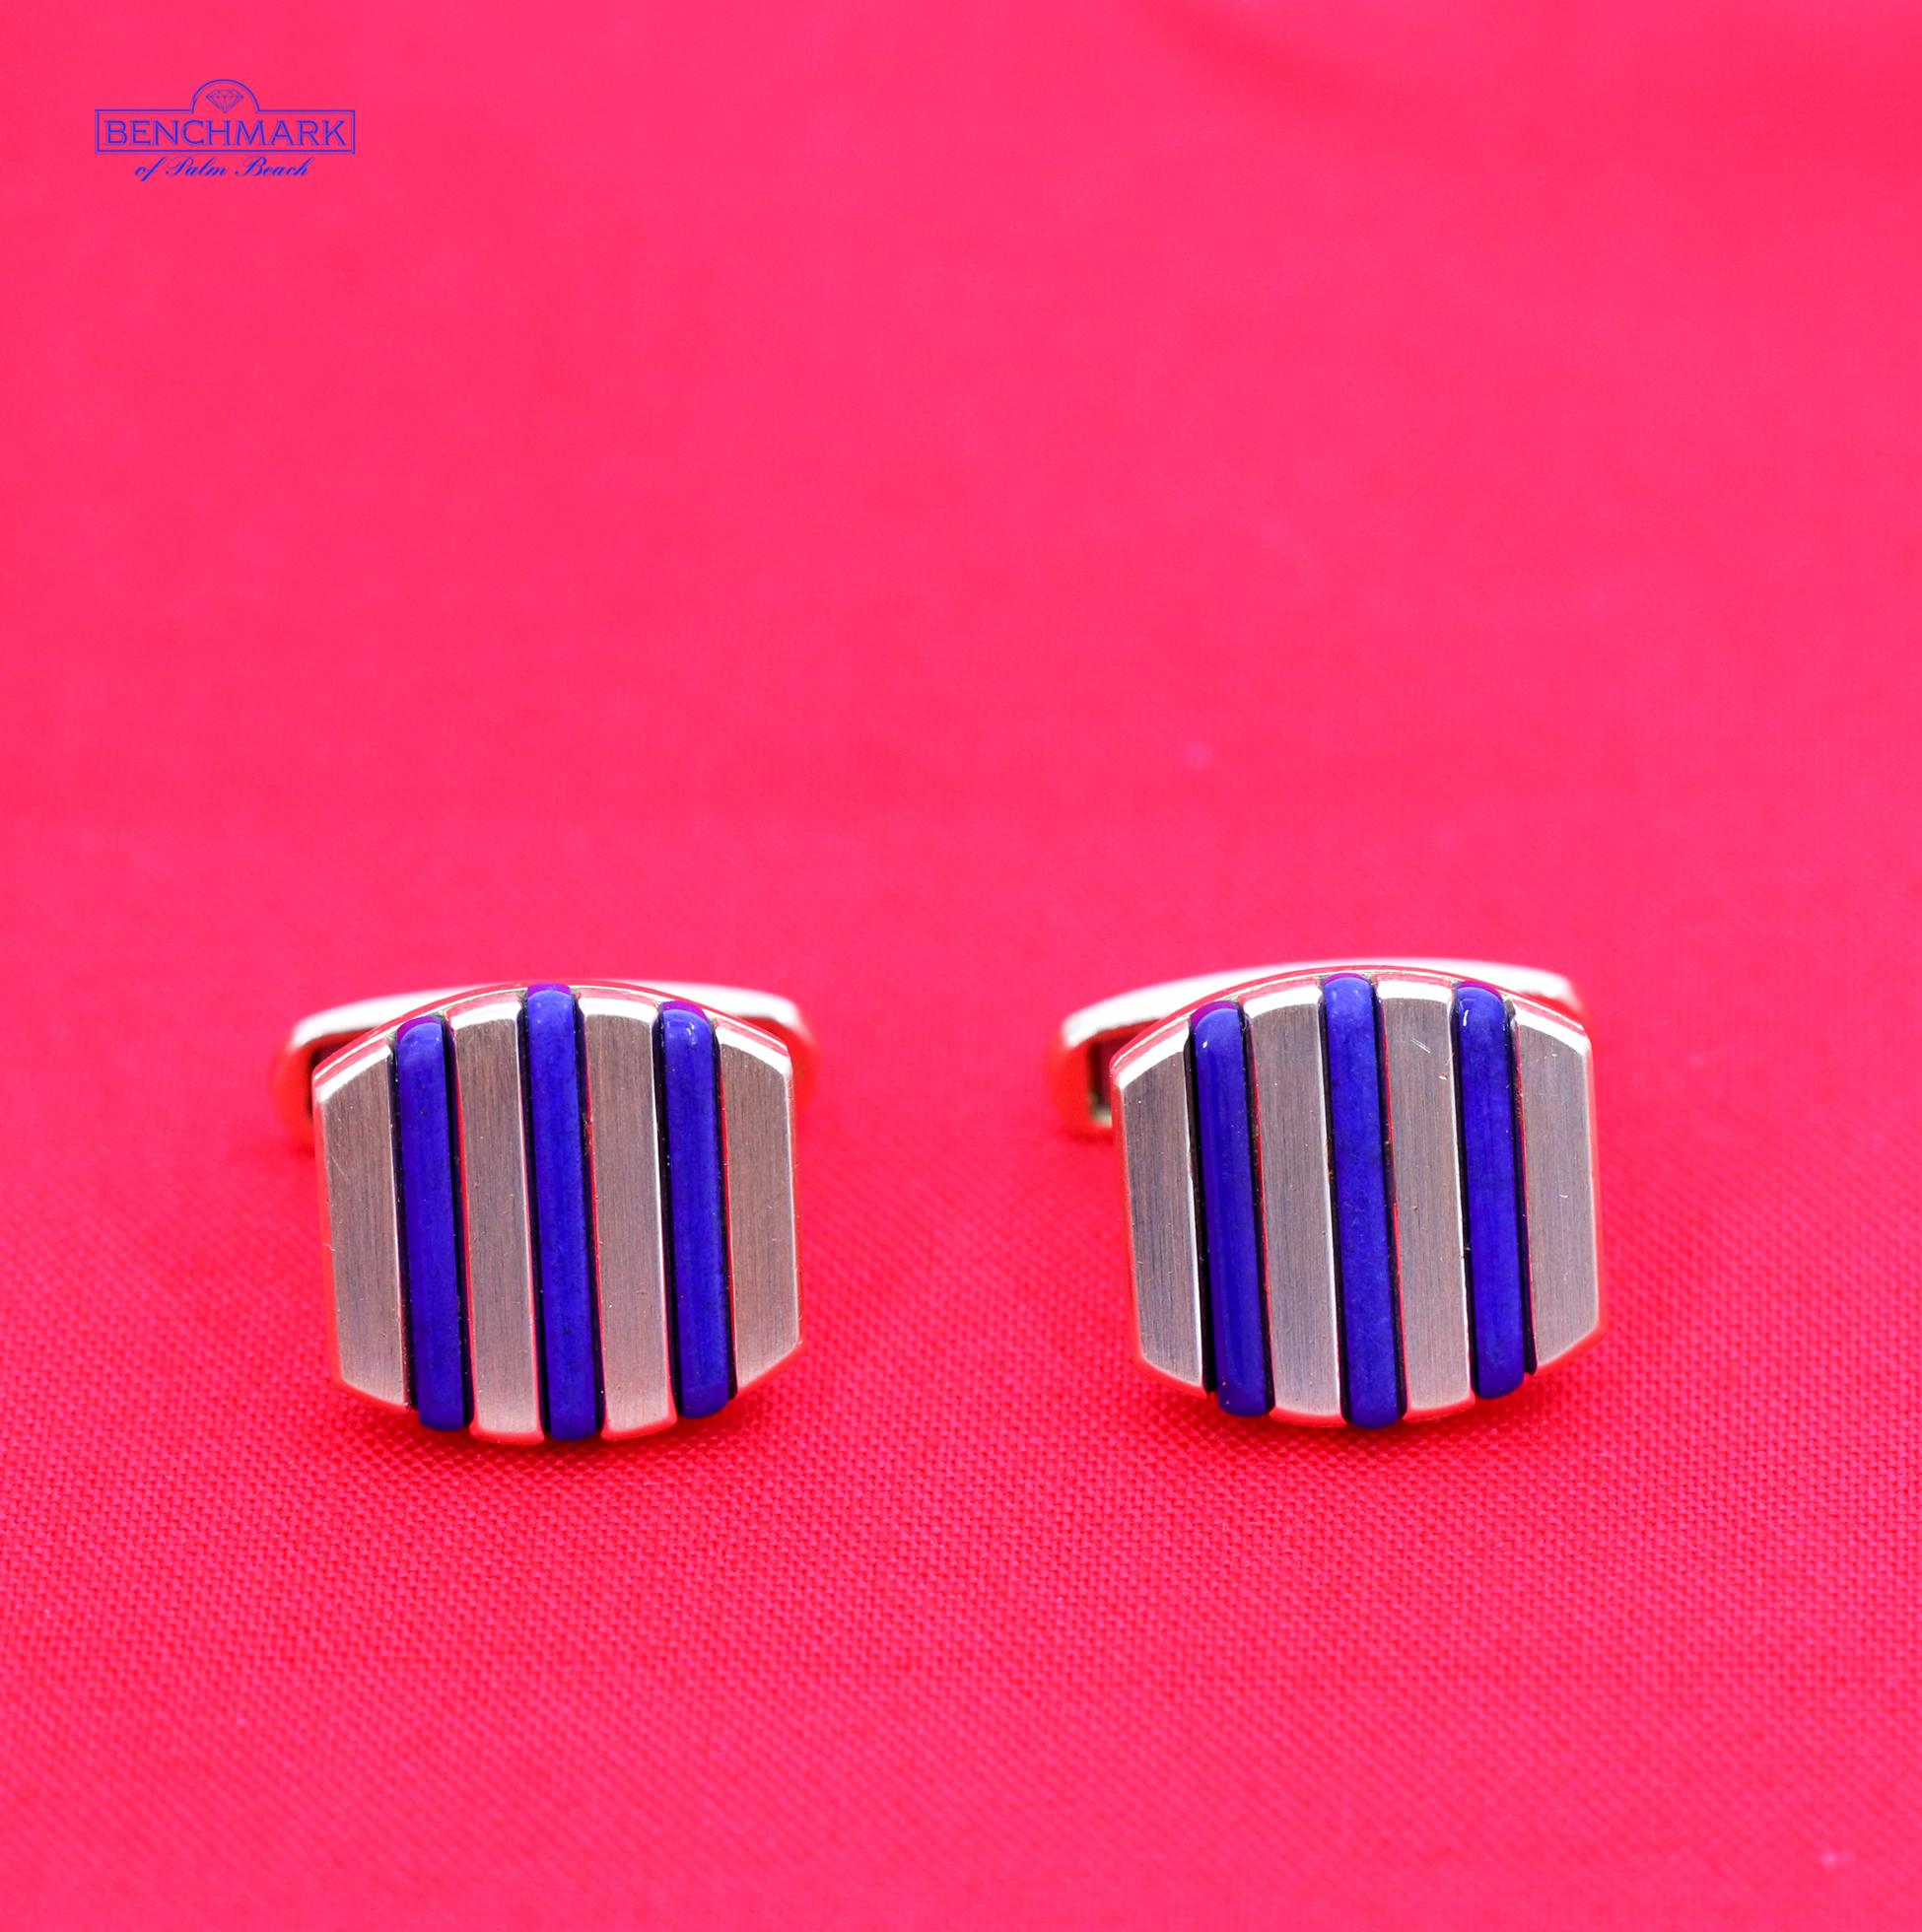 A pair of 18 karat yellow gold, cushion shaped, cufflinks, with each cufflink set with 3 lapis lazuli bars. The deep blue contrasts handsomely against the gold, and they measure just under 3/4 of an inch long. Signed A.B.L. they weigh an overall 20